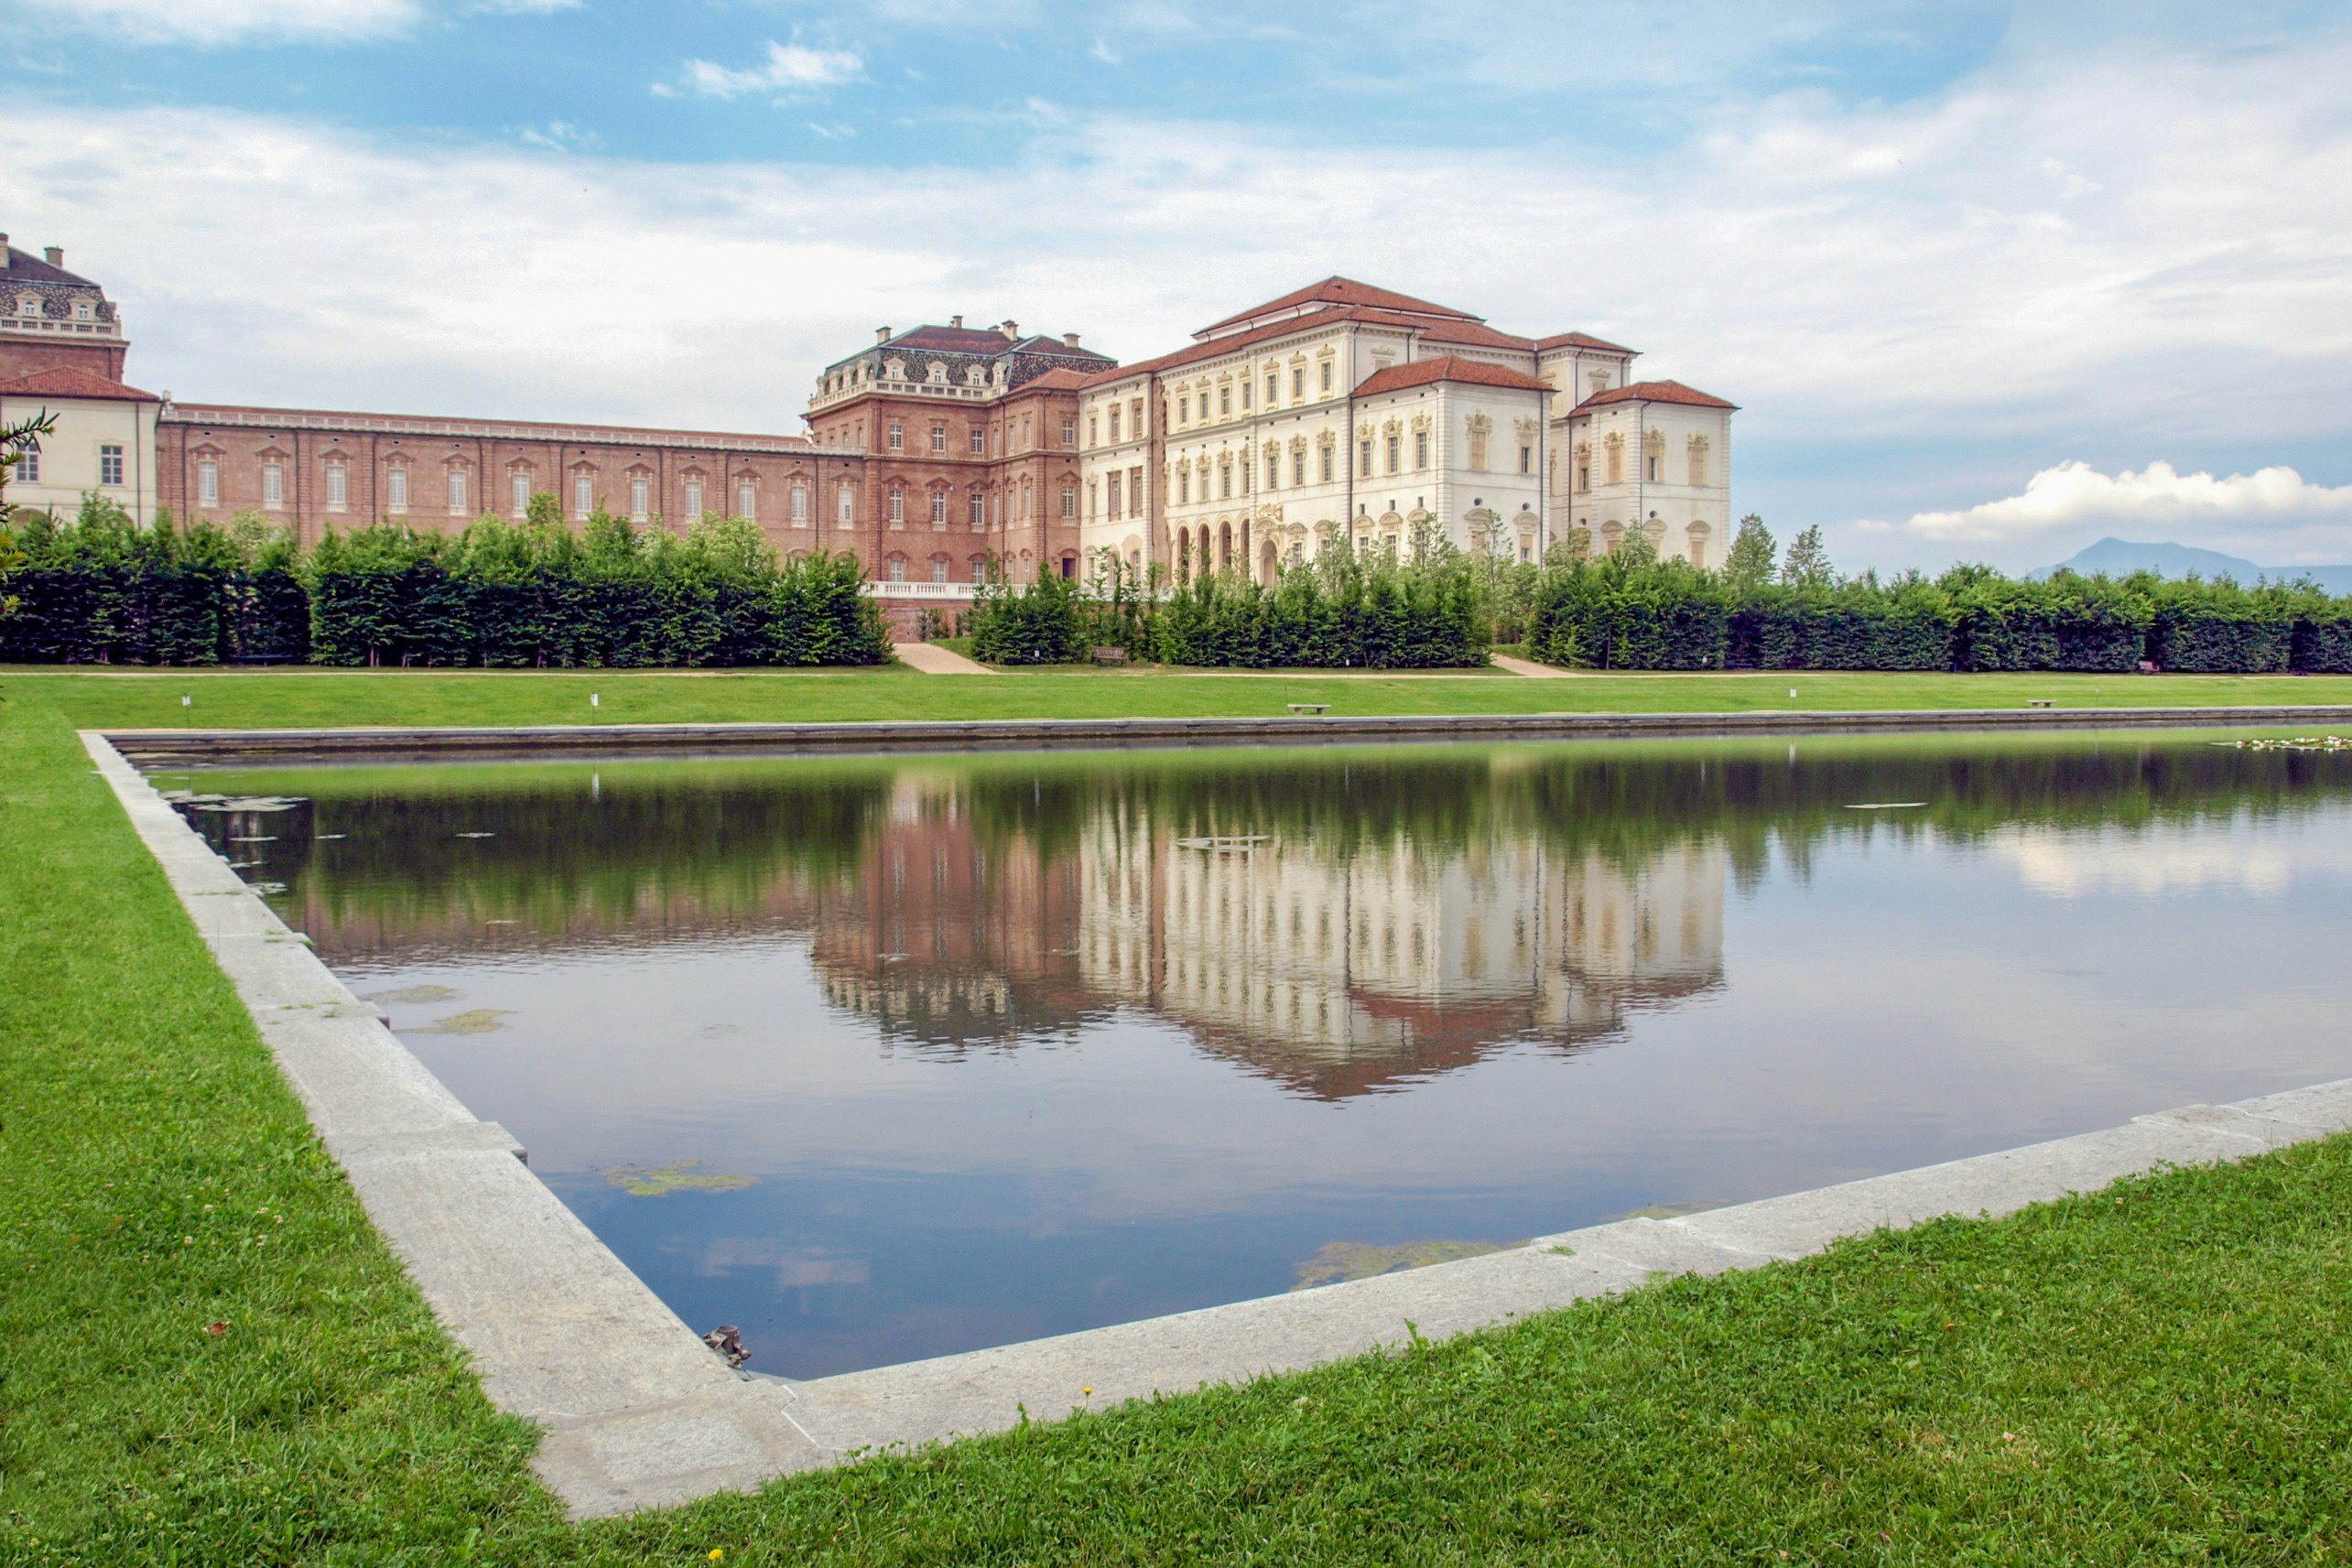 What to see in Venaria Reale